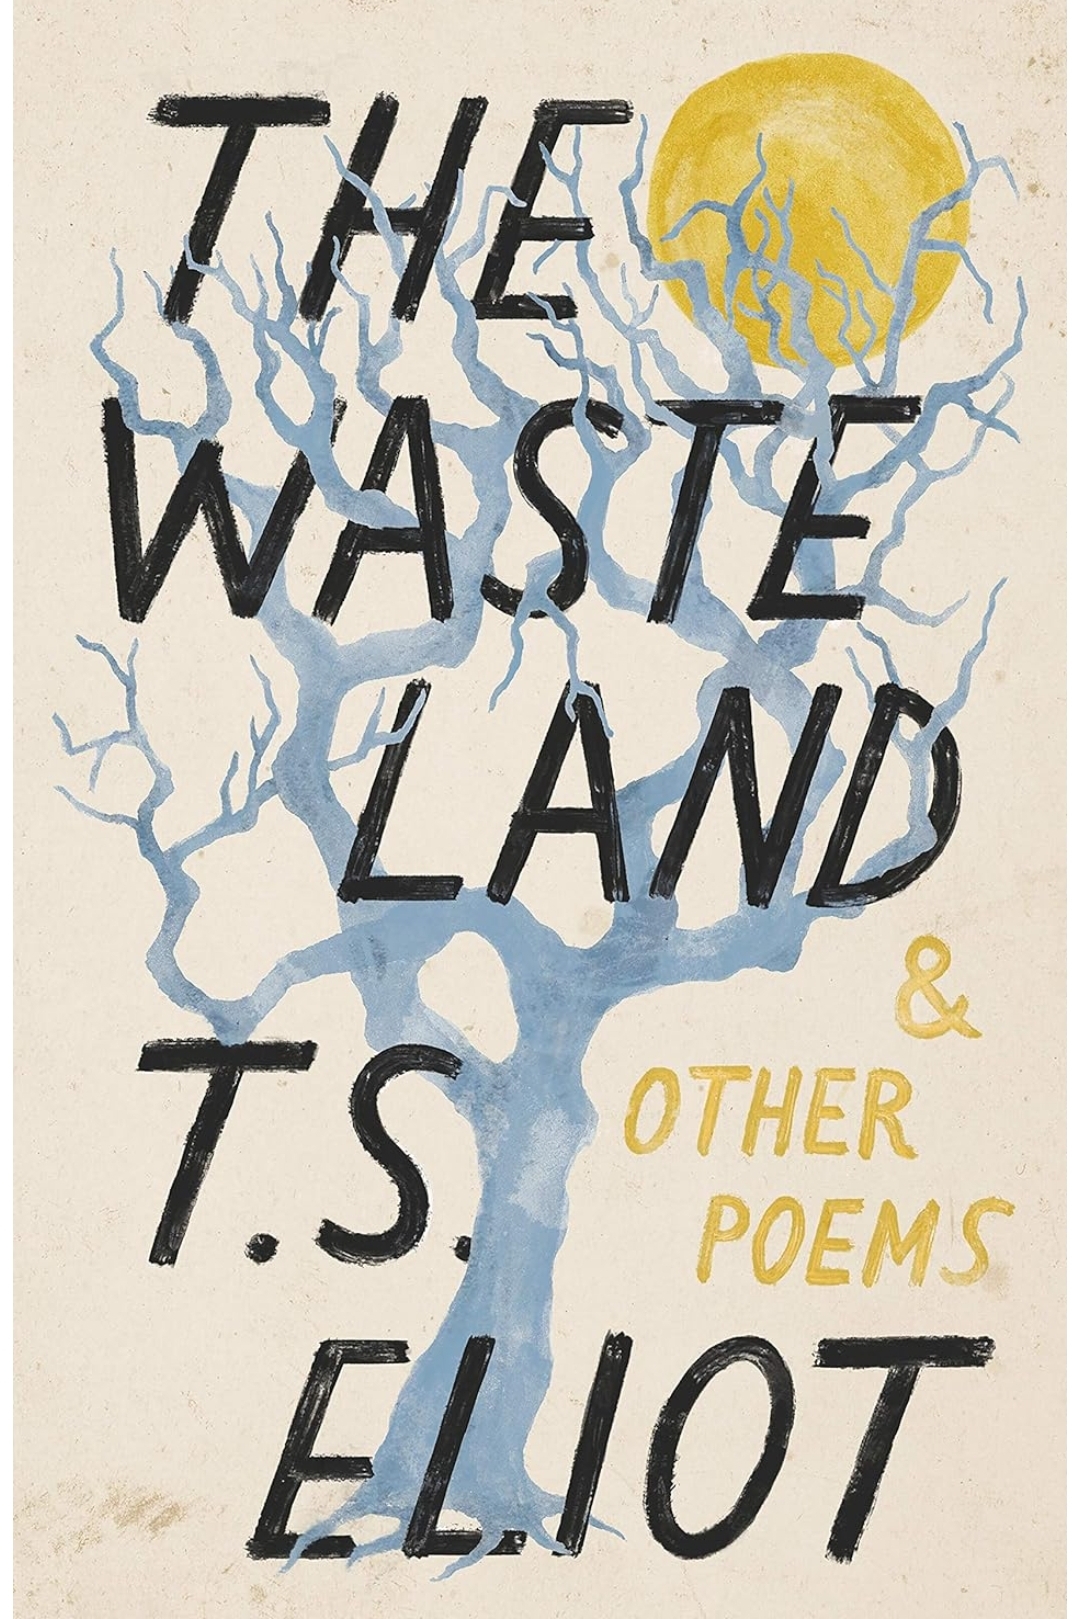 The Wasteland and Other Poems by T.S. Eliot